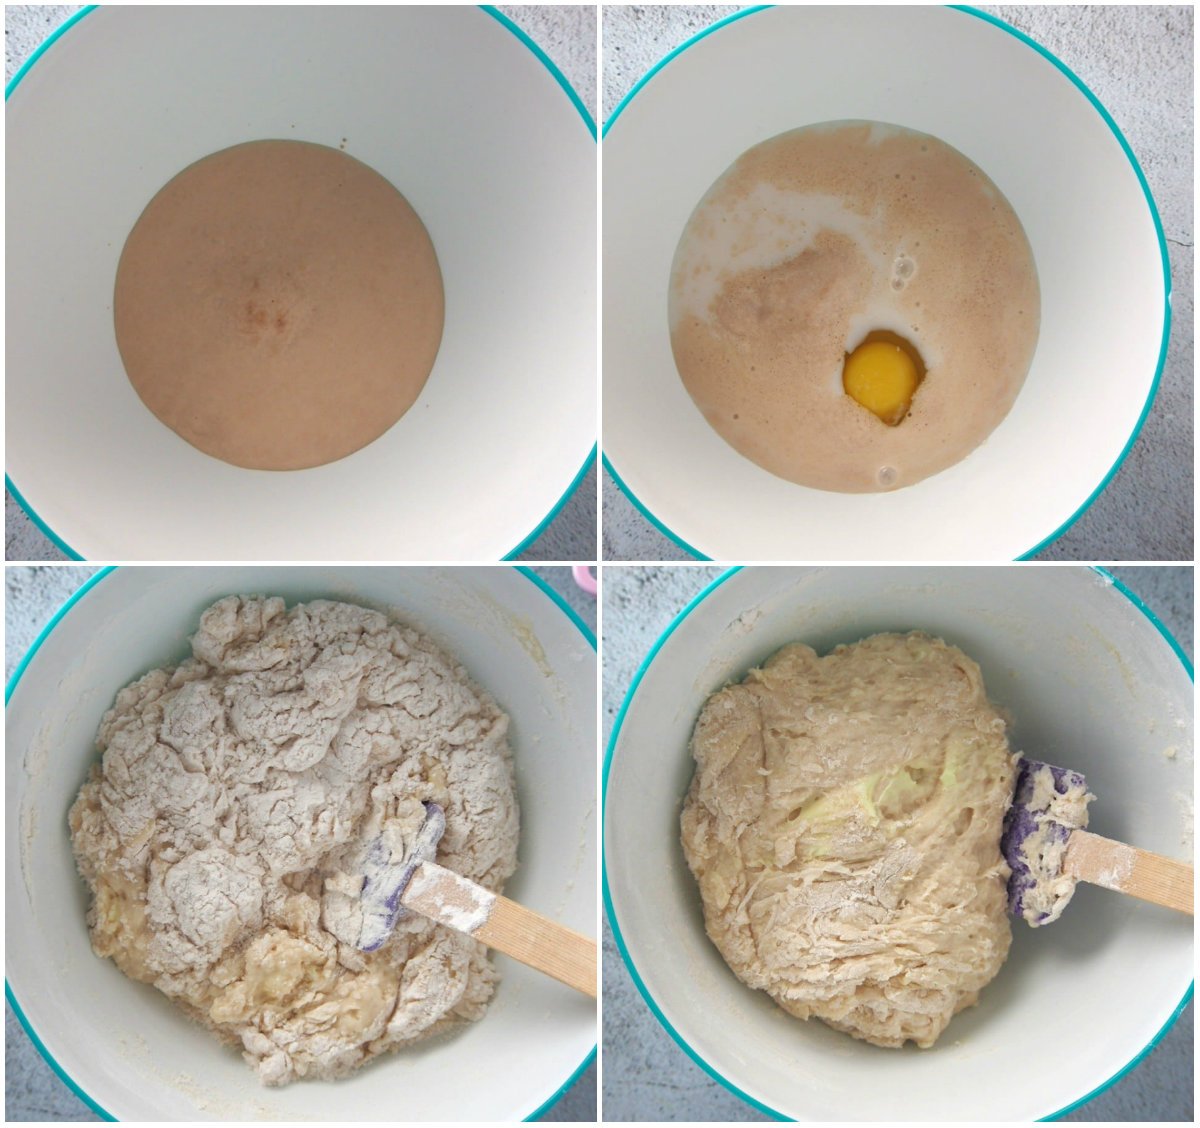 Collage showing the initial mixing of the bread dough.